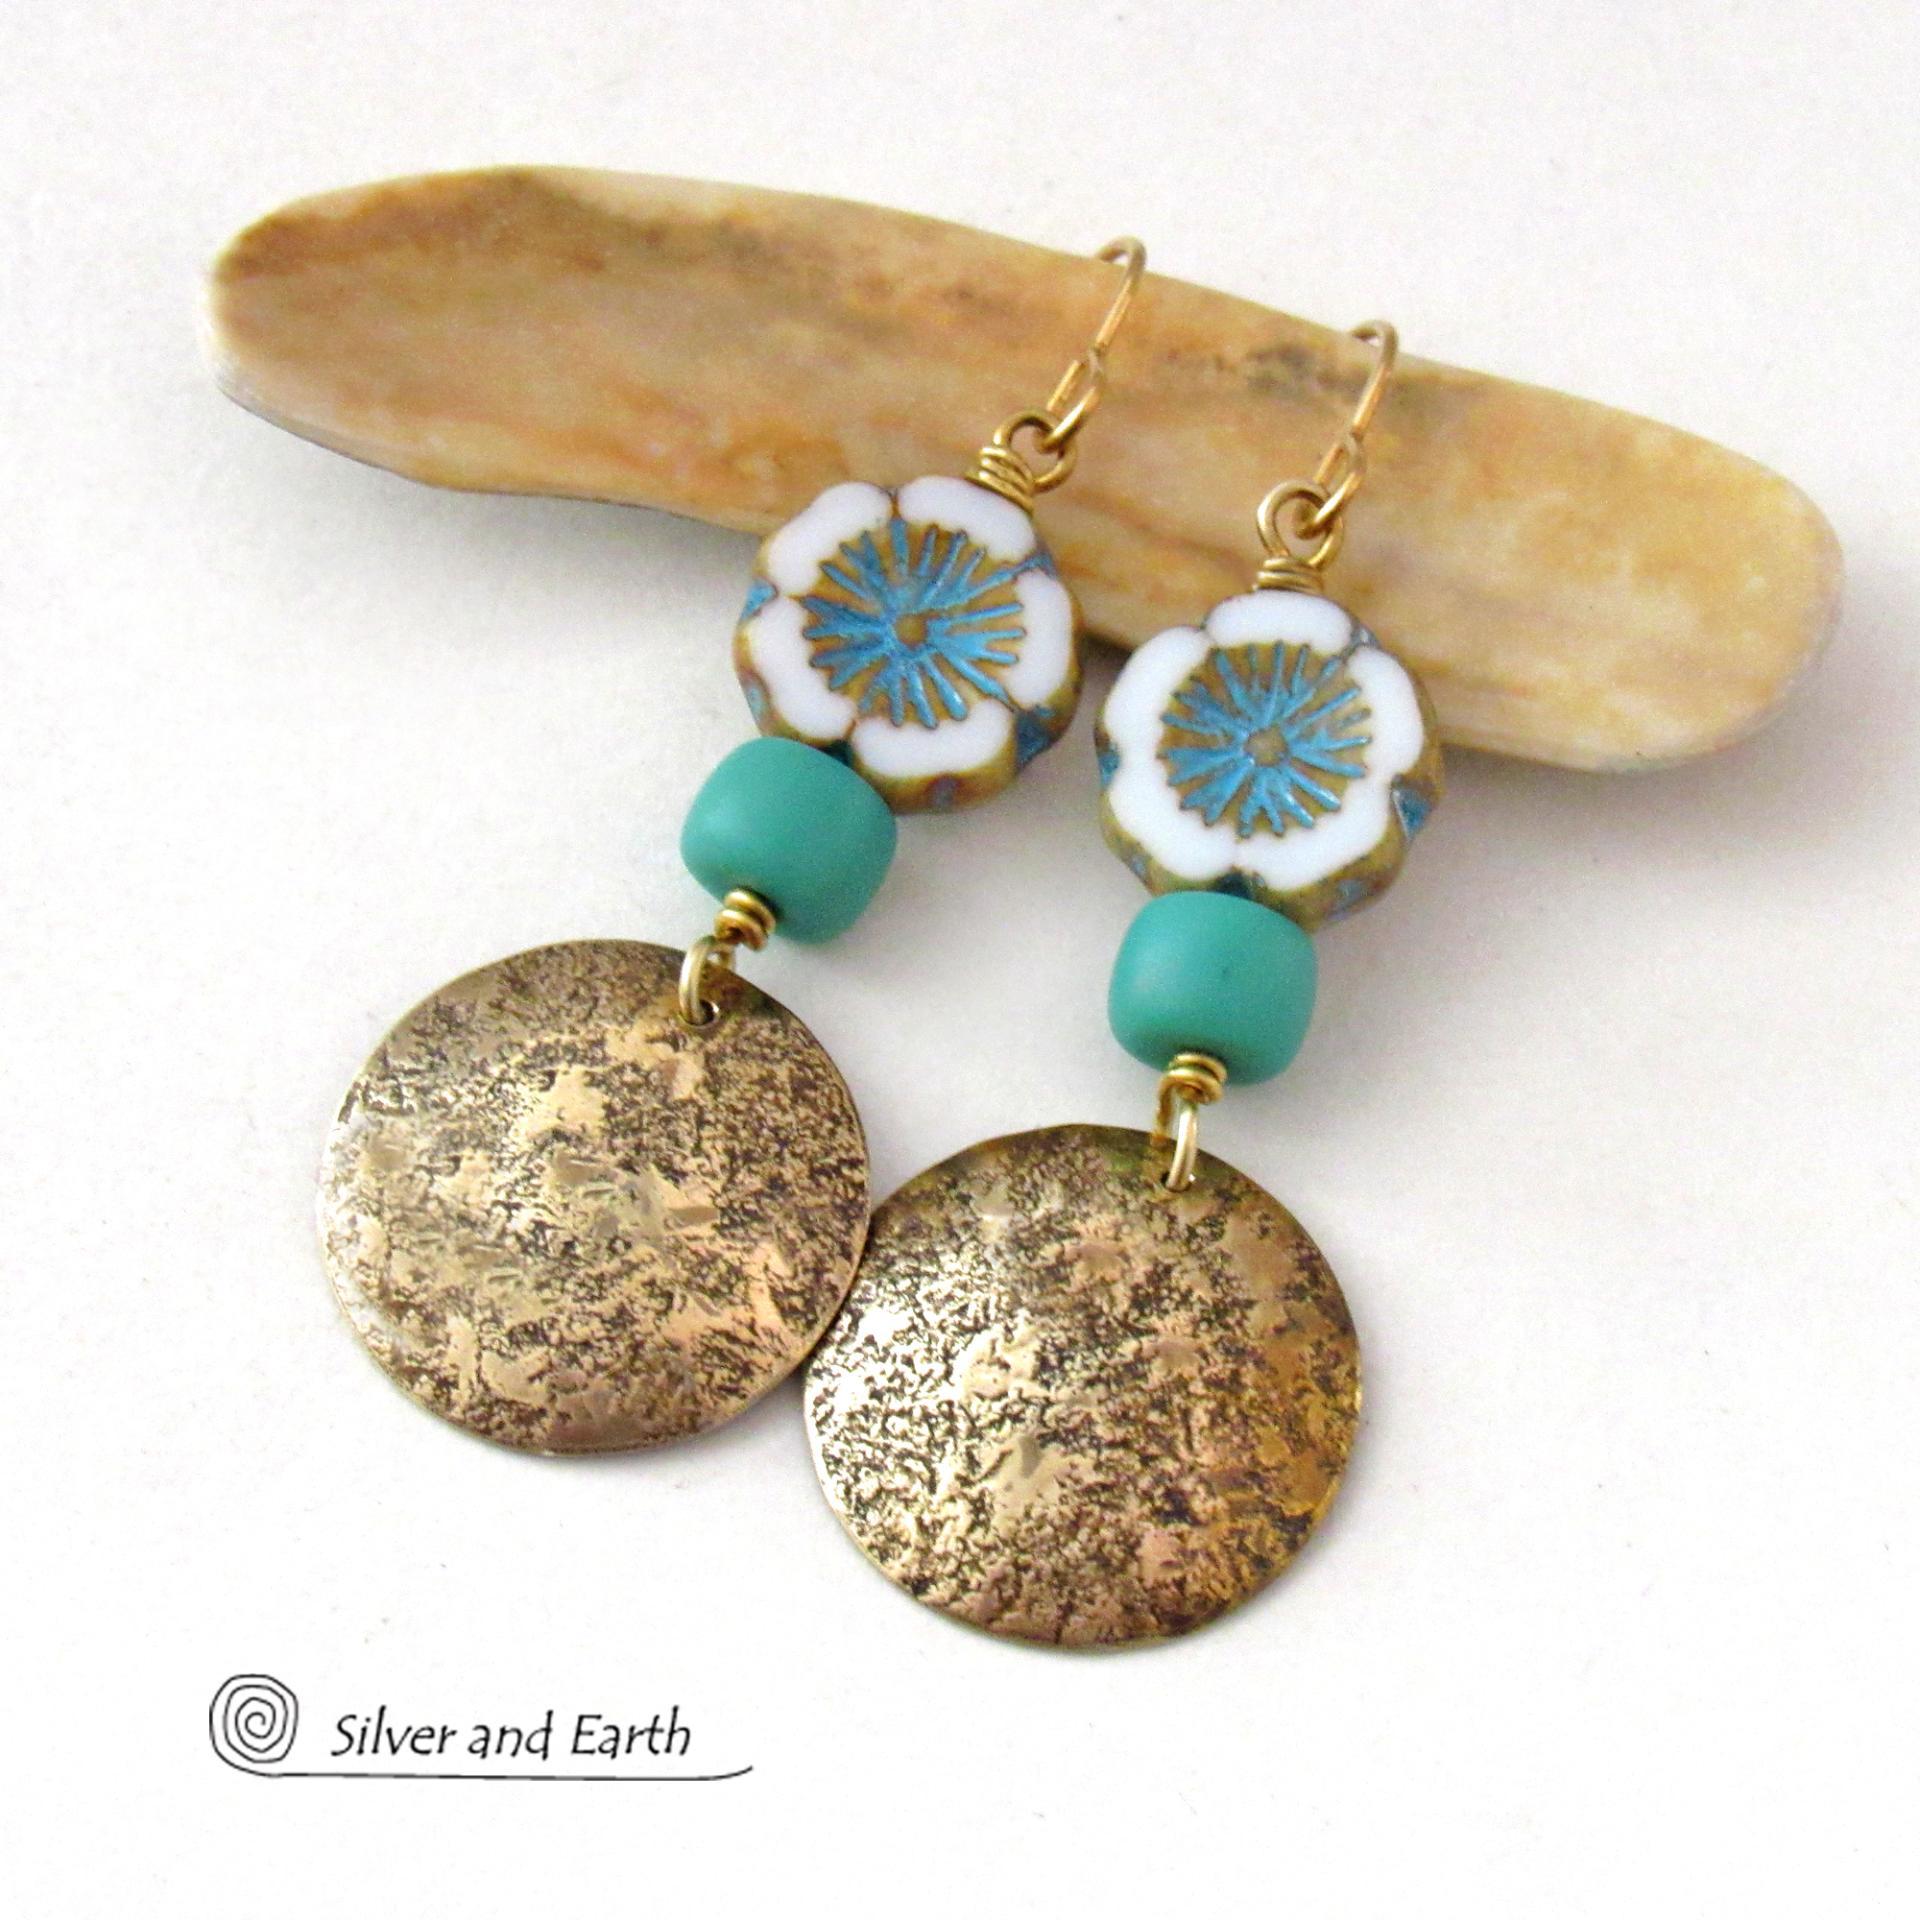 White, Turquoise Blue and Gold Glass Flower Earrings with Brass Dangles - Unique Nature Jewelry Gifts for Women